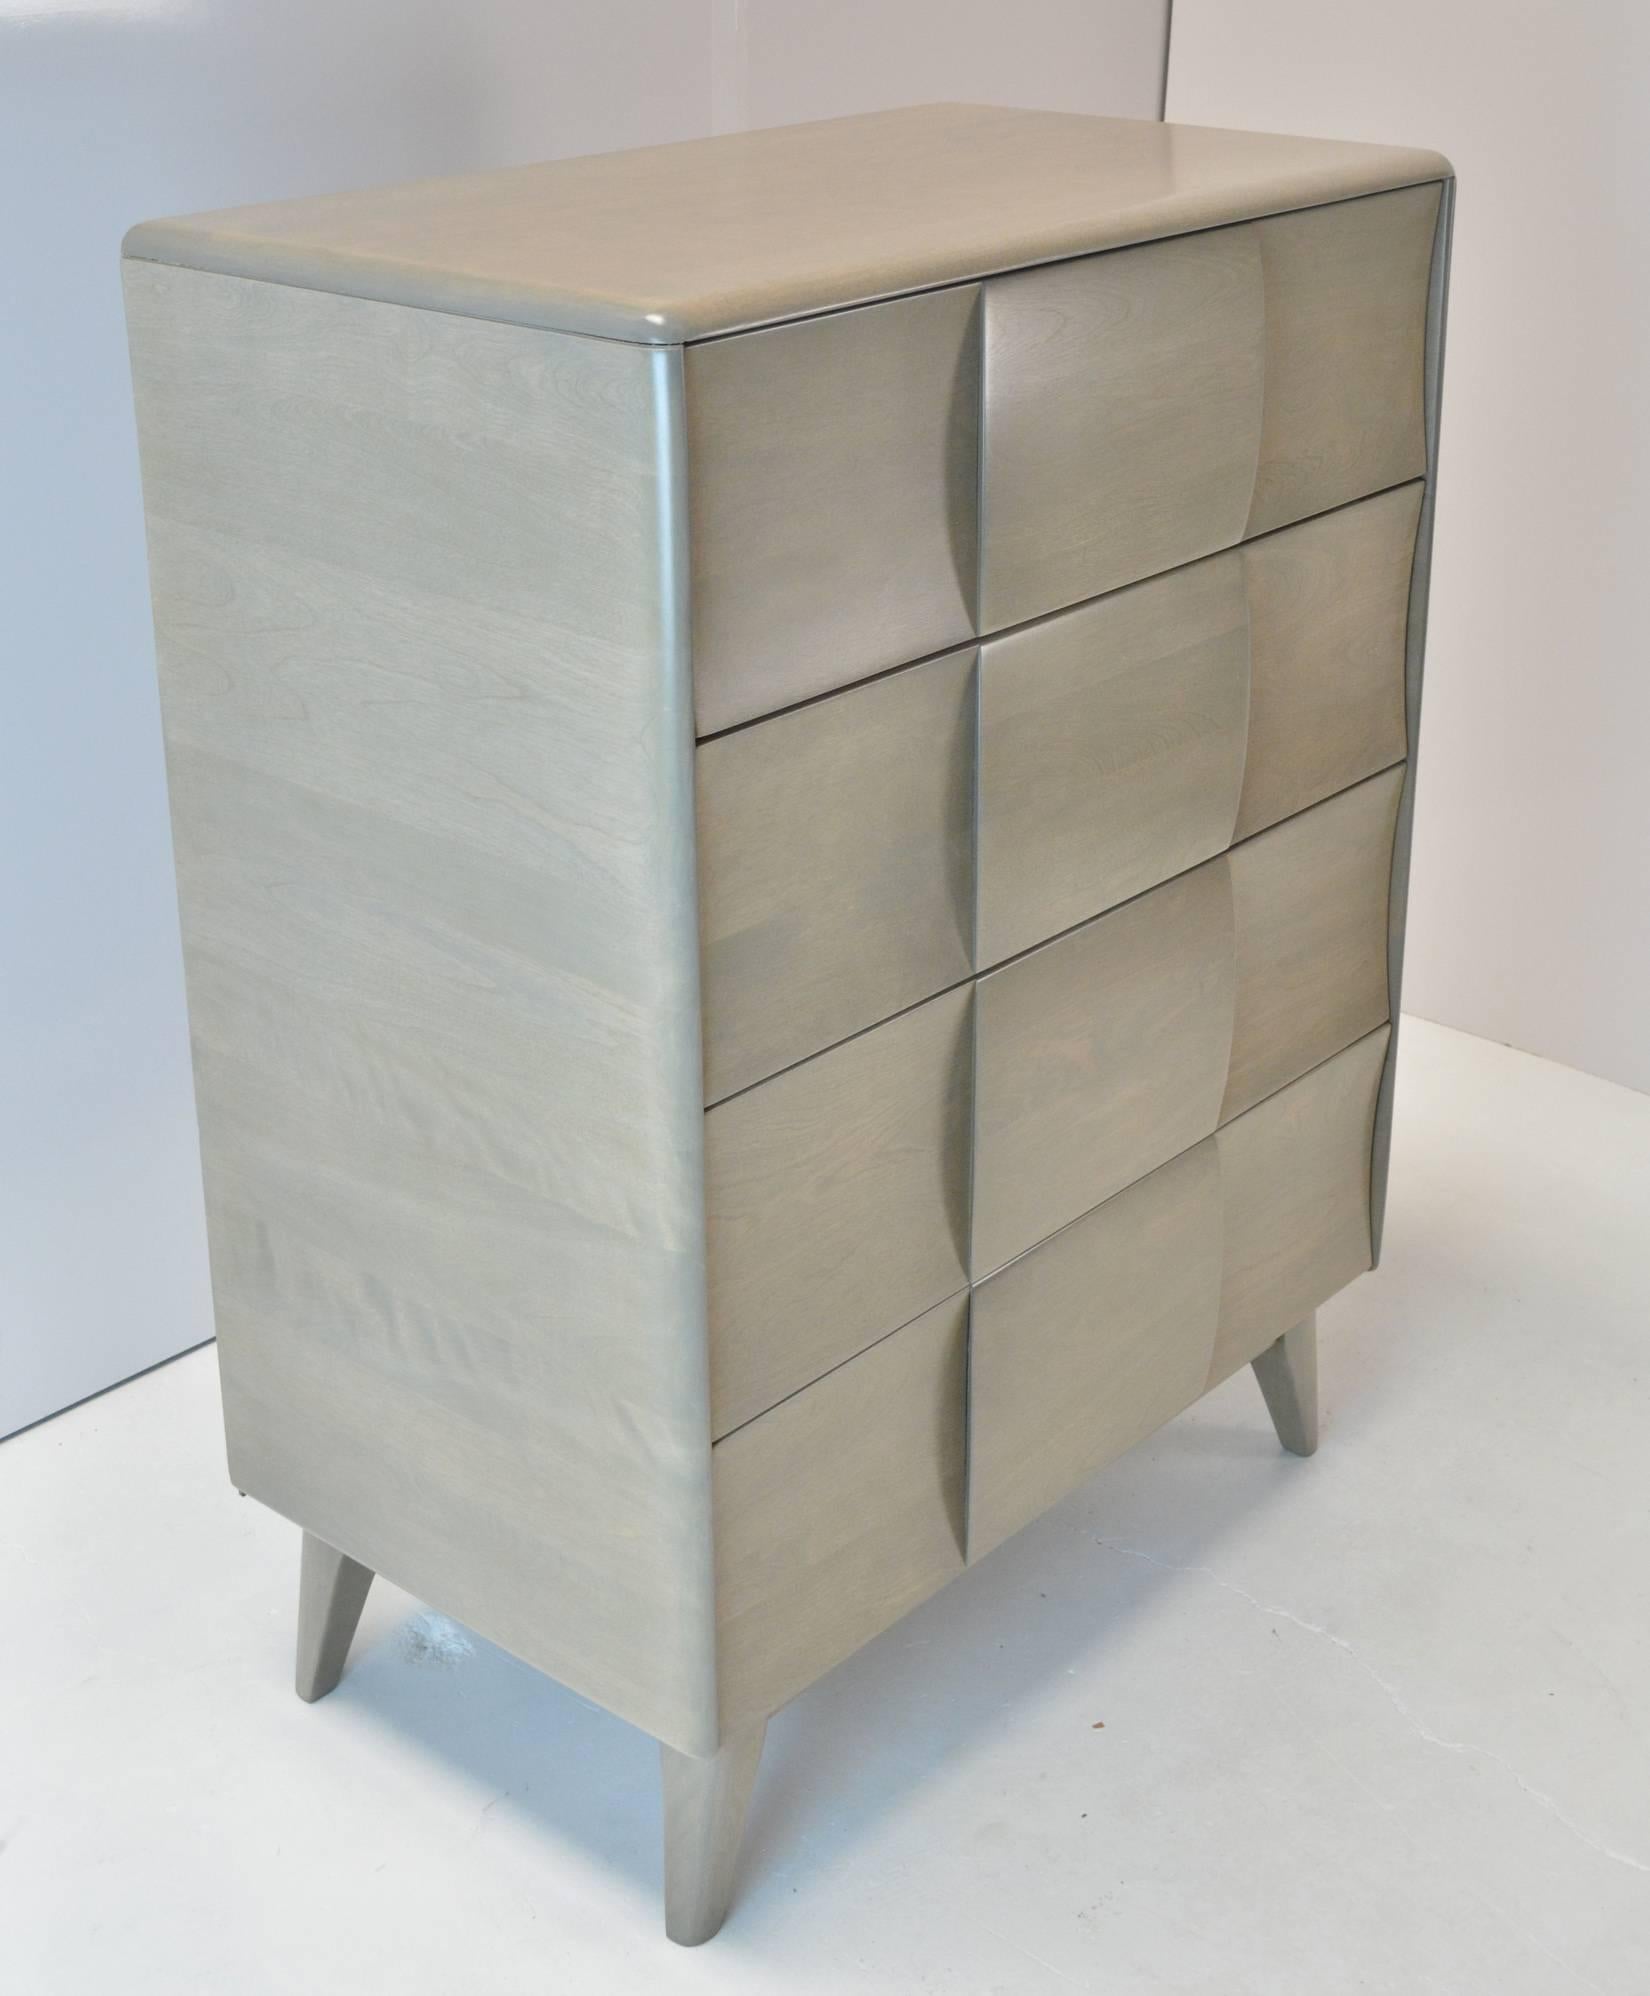 A Mid-Century Modern four-drawer chest with sculptural block front and shaped legs. Refinished in a silver grey stain.